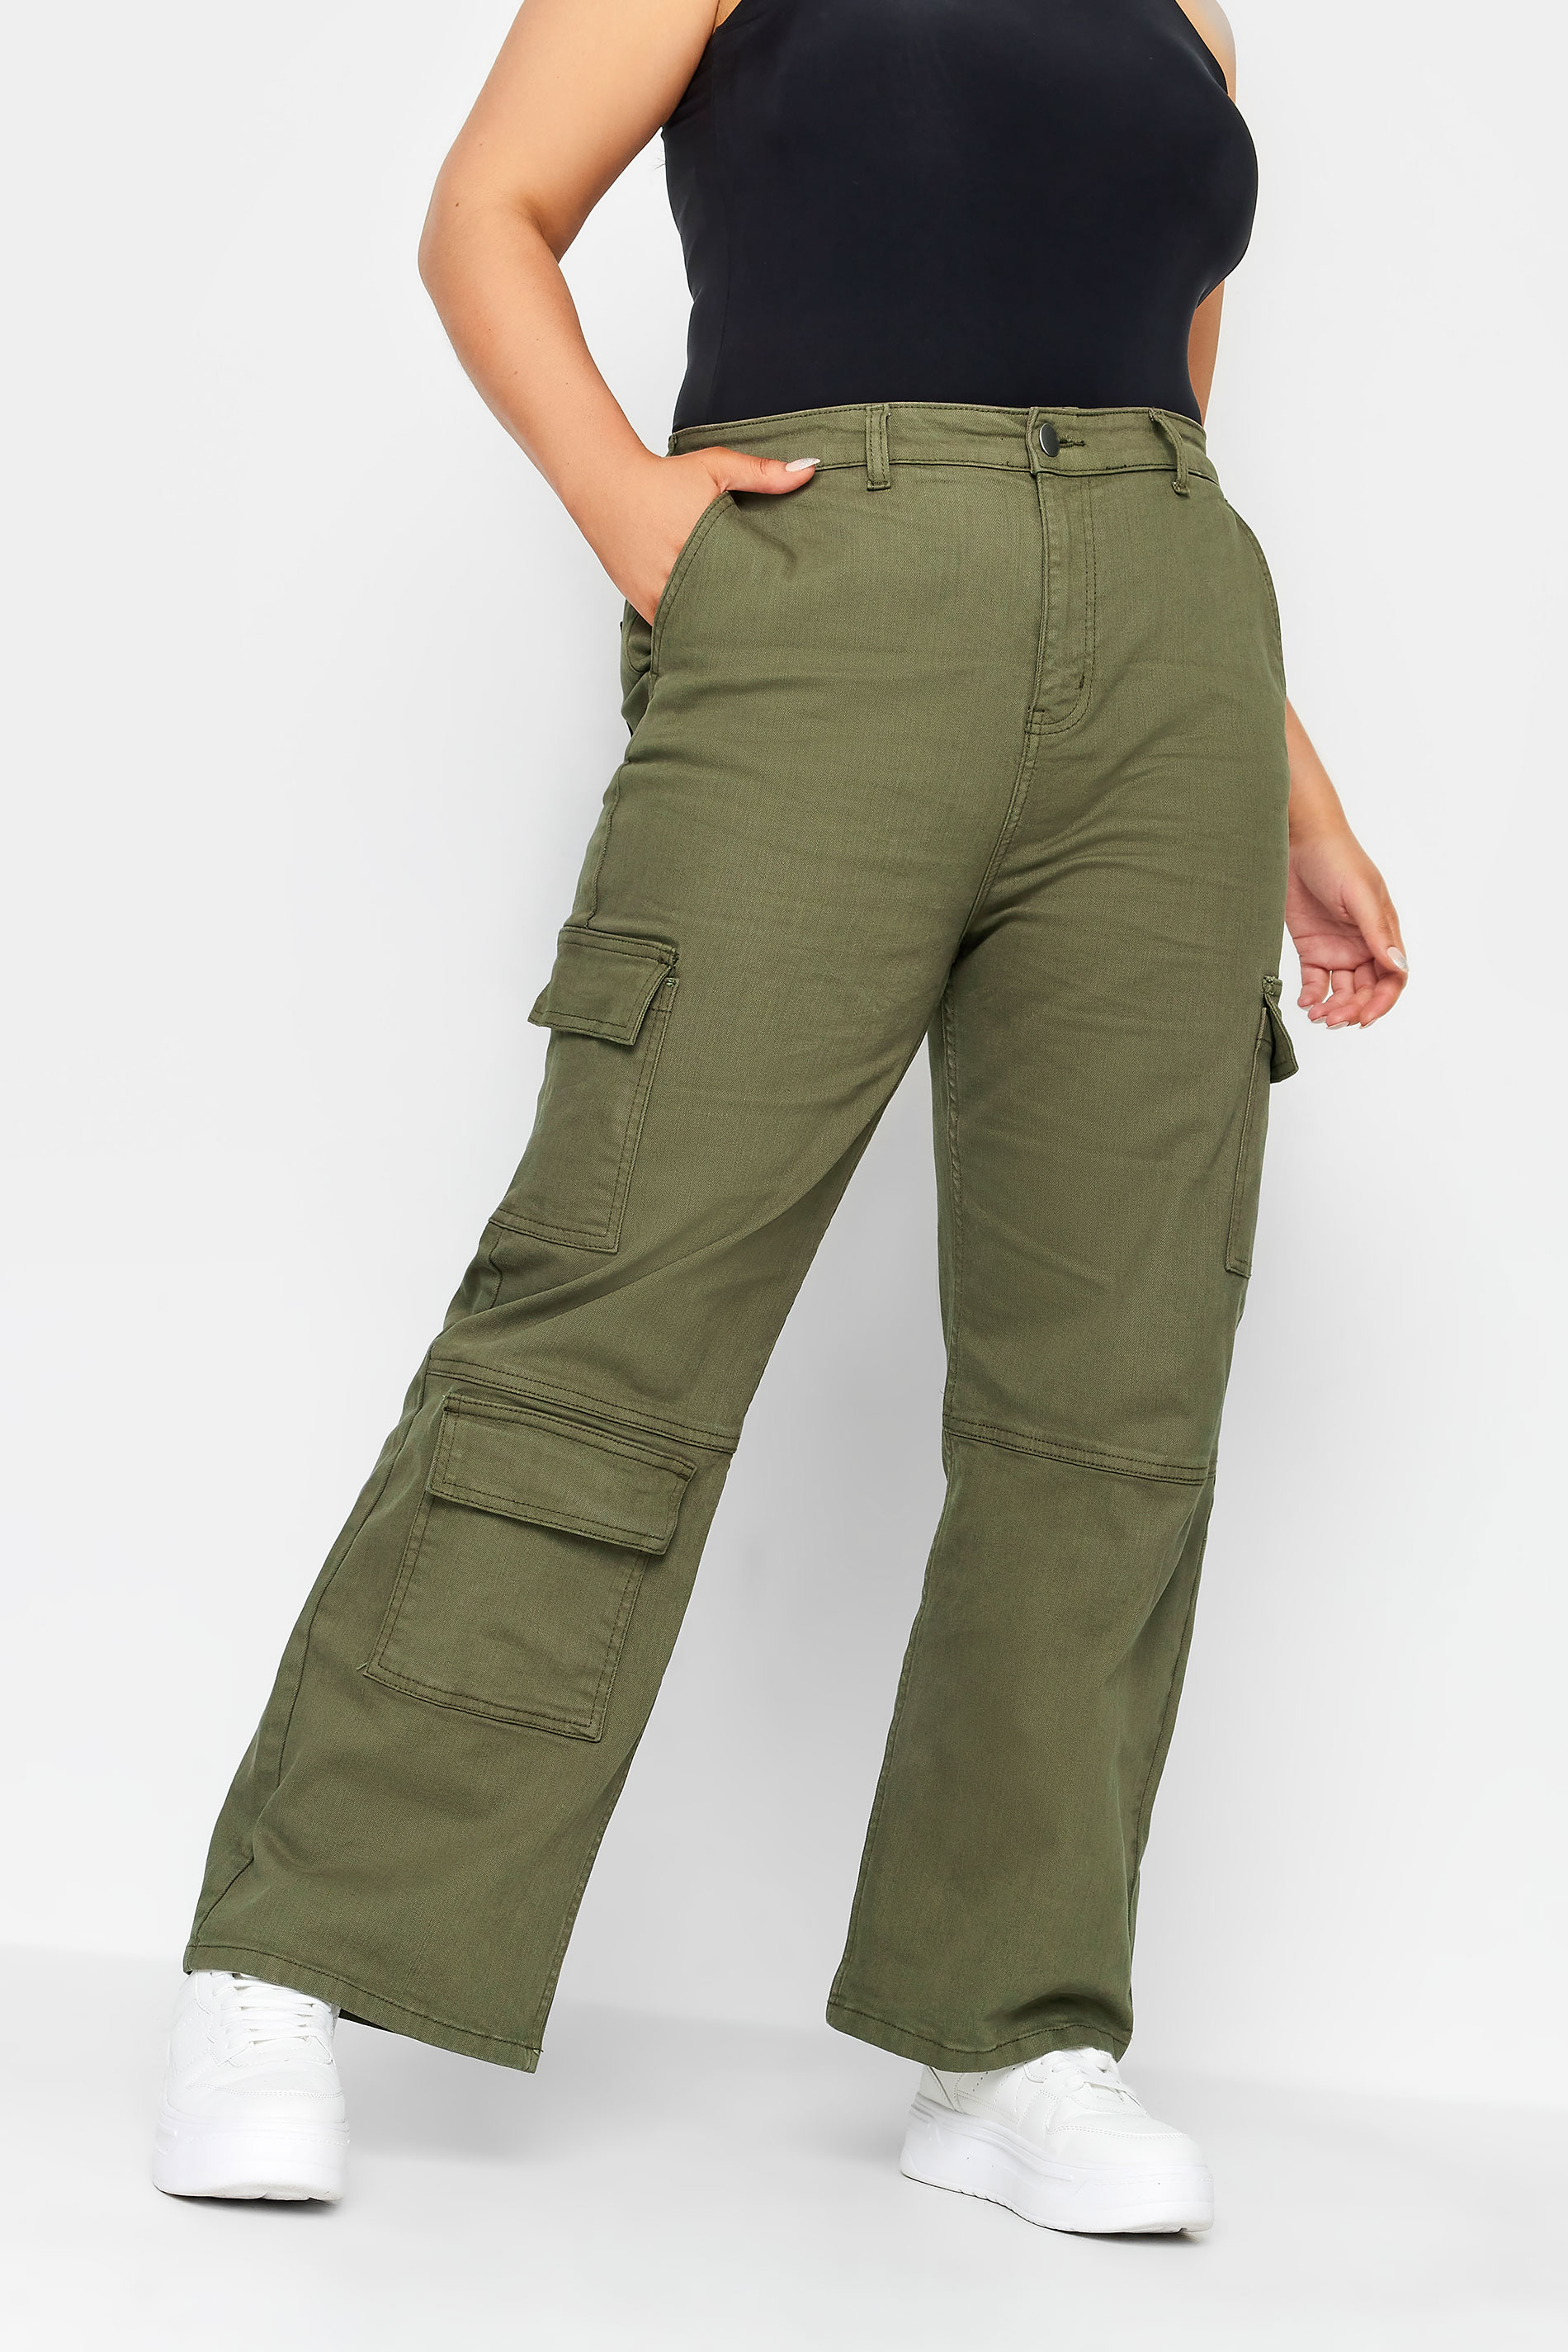 YOURS Curve Plus Size Khaki Green Wide Leg Pocket Cargo Trousers | Yours Clothing  1